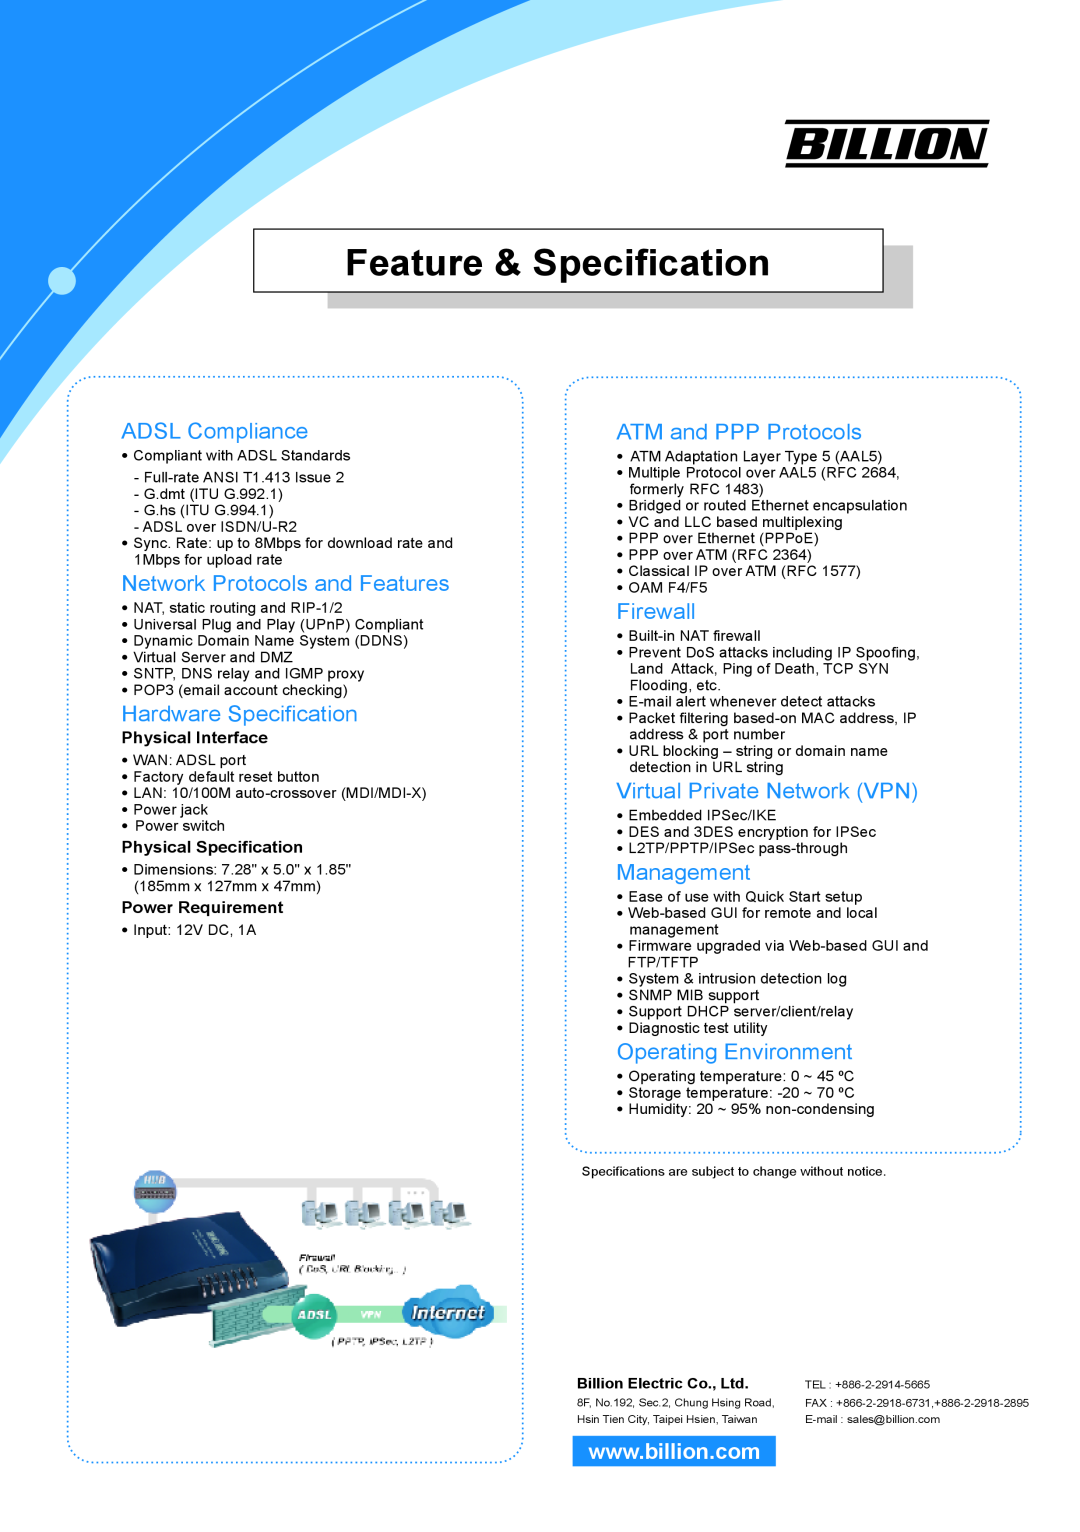 Billion Electric Company BIPAC-7100S Feature & Specification, ADSL Compliance, Network Protocols and Features, Firewall 